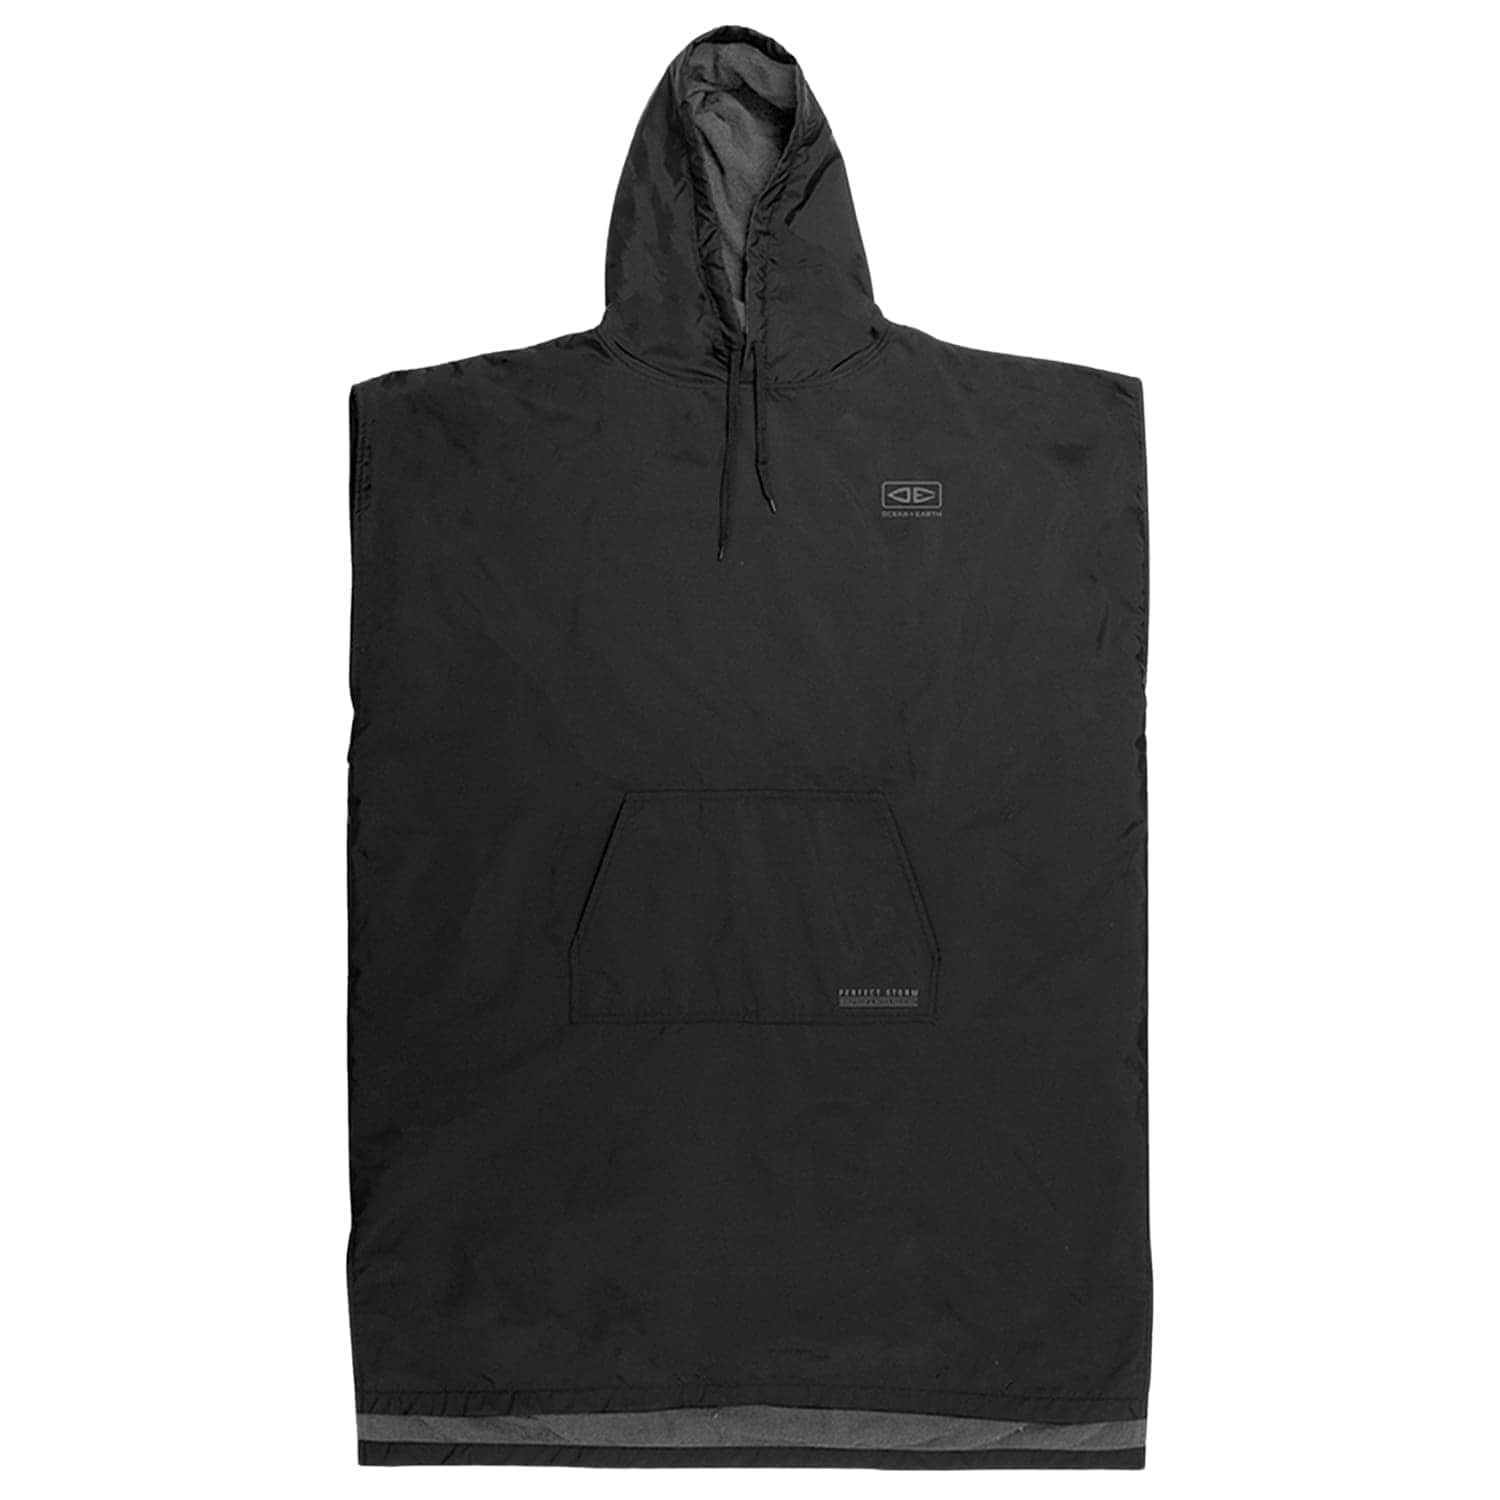 Photos - Towel Ocean and Earth Perfect Storm Hooded Poncho - Black